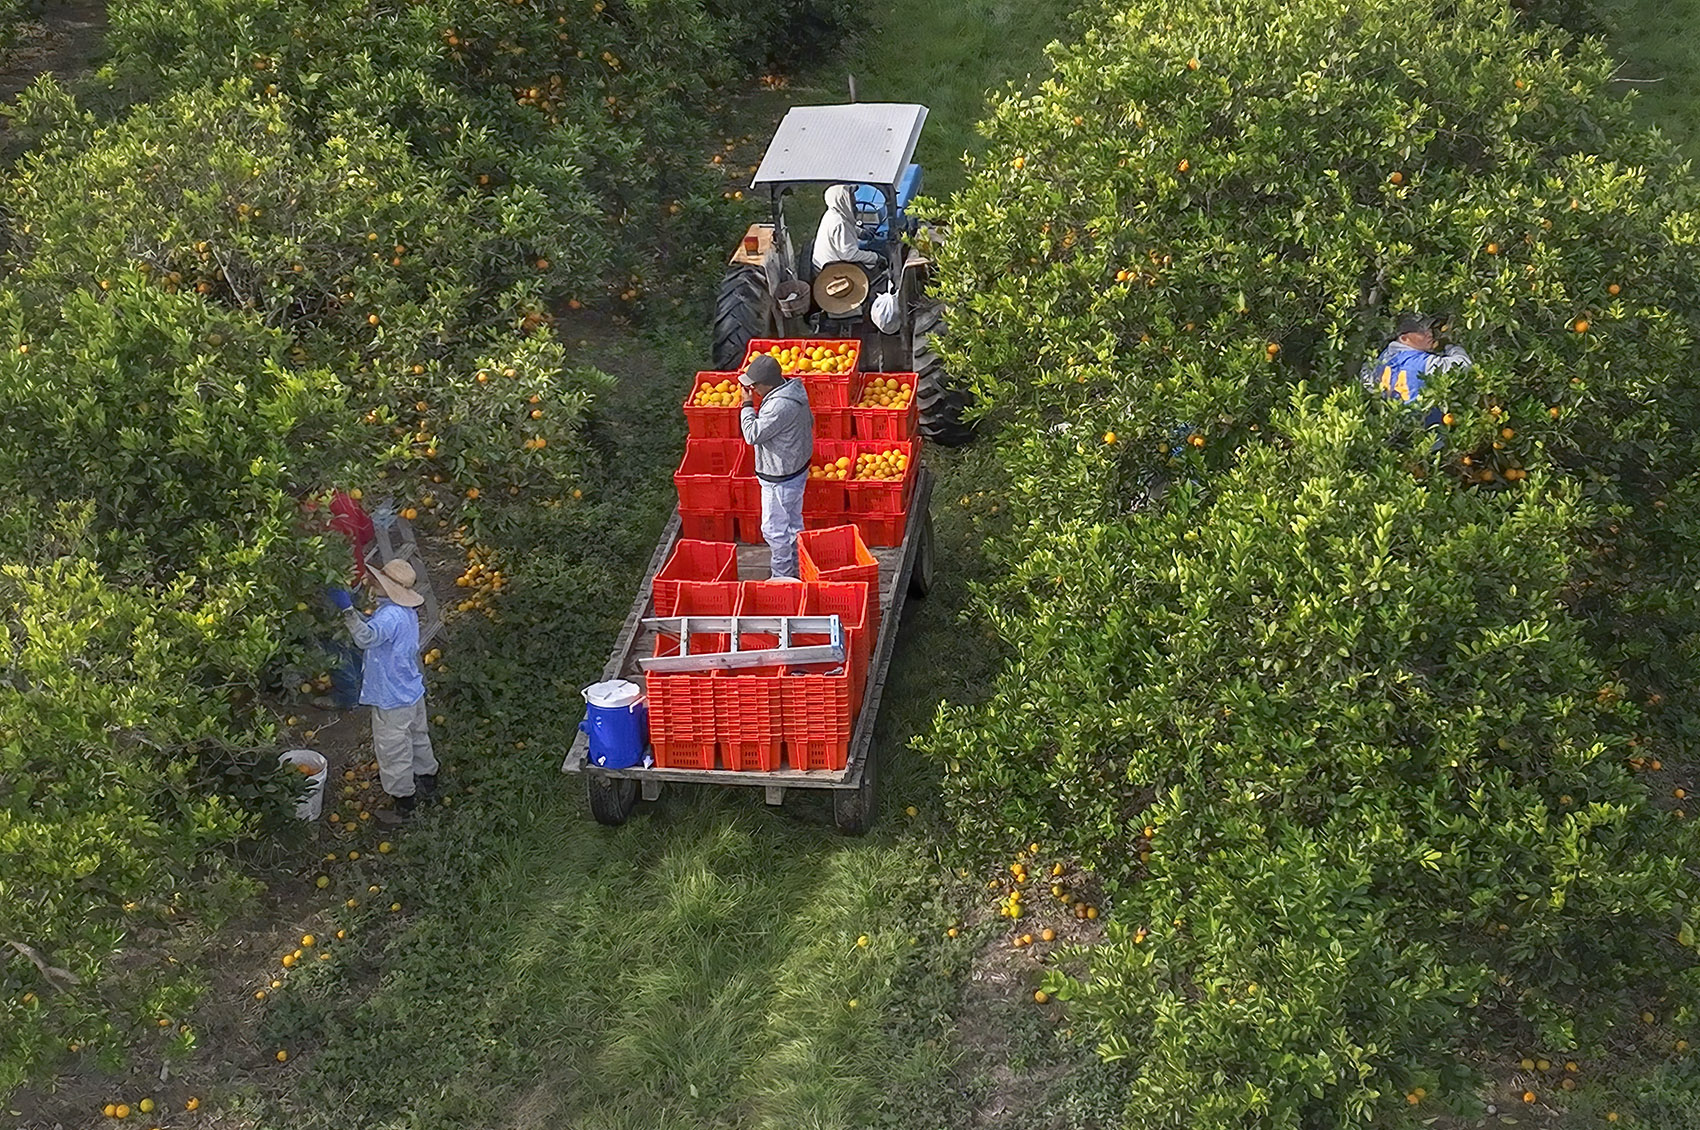 aerial view of men picking oranges with tractor and orange bins on trailer